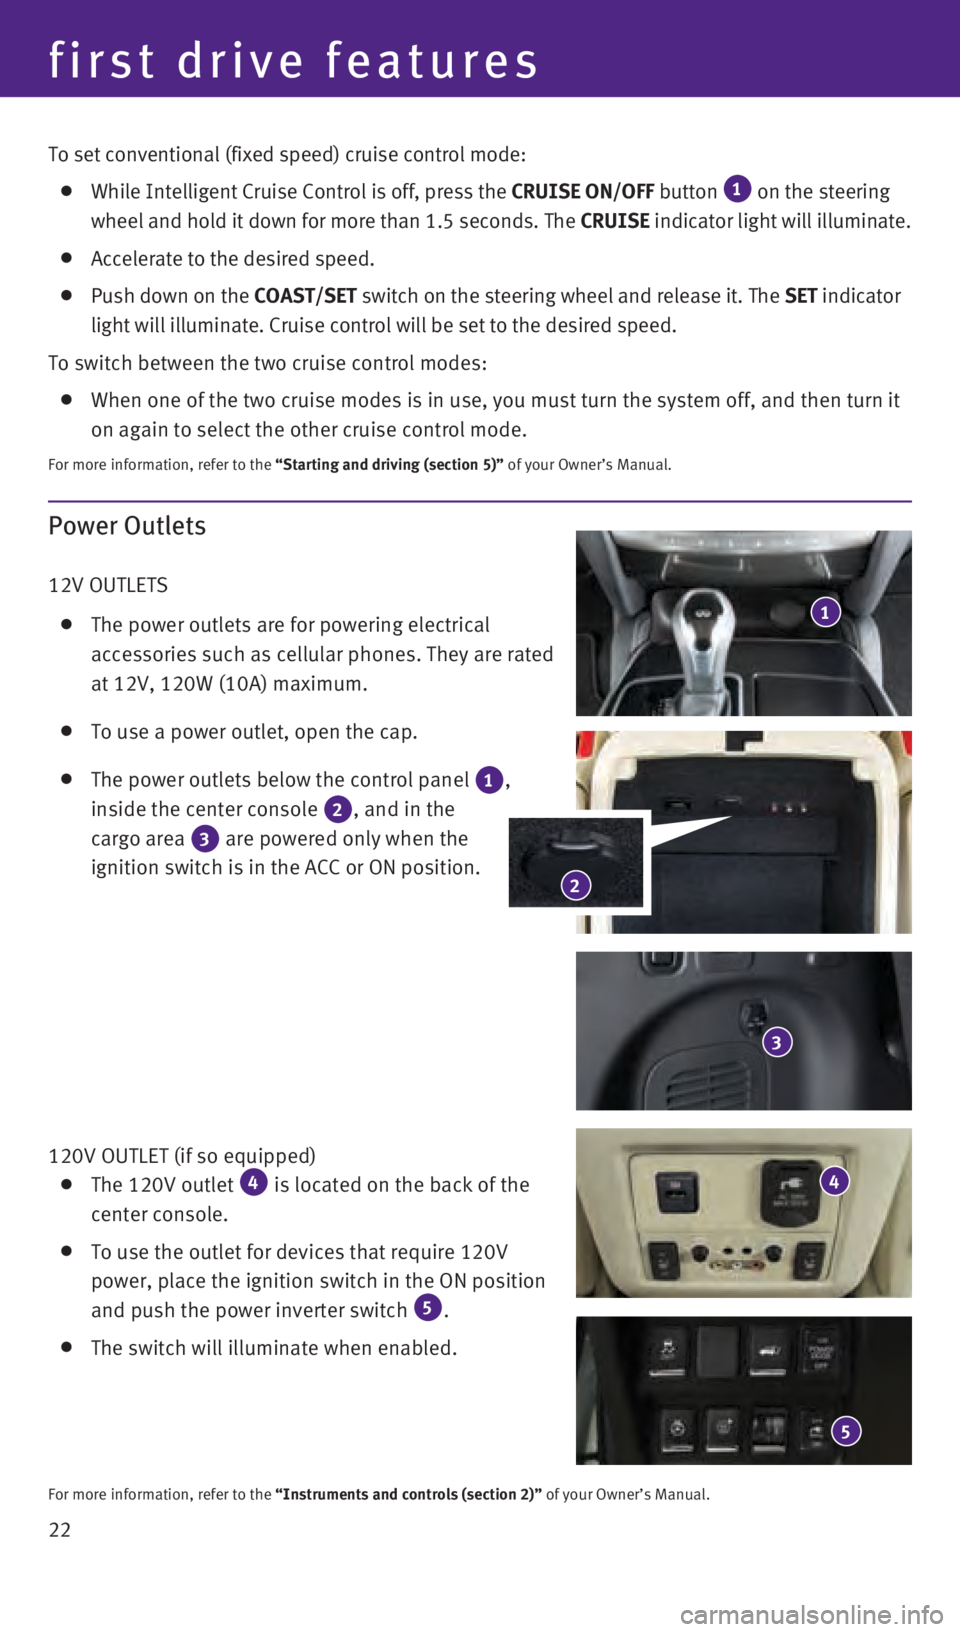 INFINITI QX60 2016  Quick Reference Guide 22
Power Outlets
12V OUTLETS 
   The power outlets are for powering electrical 
accessories such as cellular phones. They are rated 
at 12V, 120W (10A) maximum. 
  To use a power outlet, open the cap.